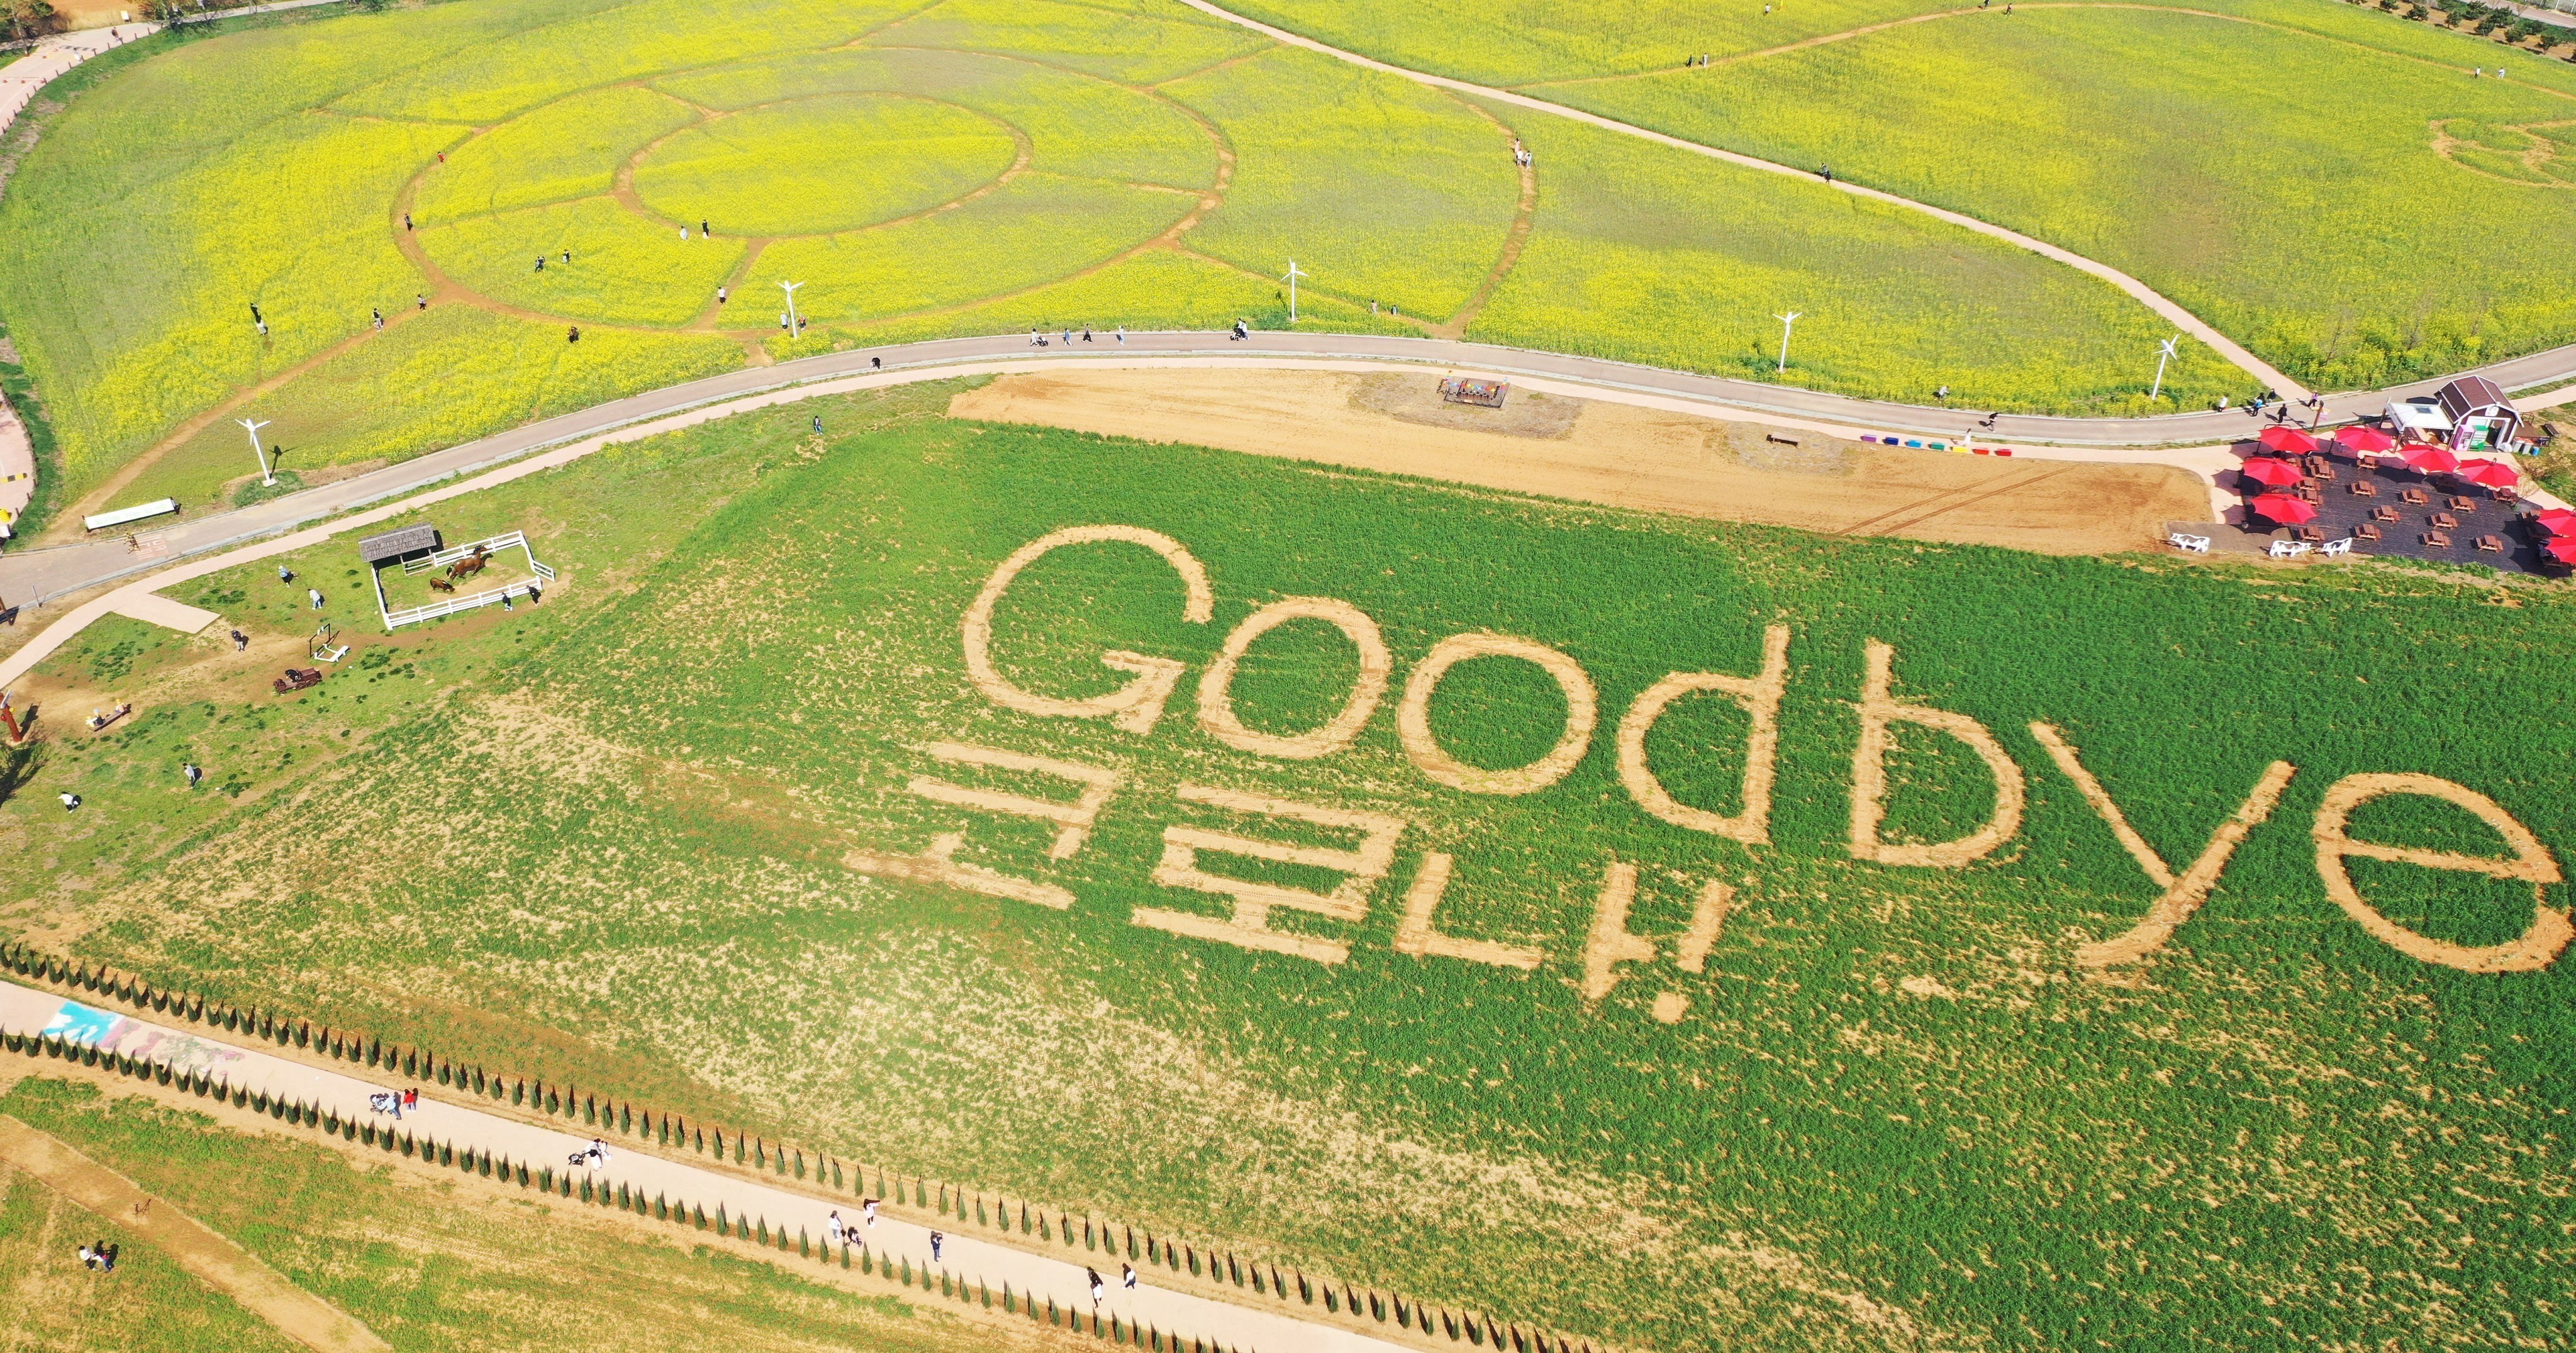 The phrase “Goodbye coronavirus!” is written in a rye paddy in Anseong, South Korea. The message celebrates the country’s lifting of most Covid-19 social distancing rules. Photo: EPA-EFE/Yonhap 